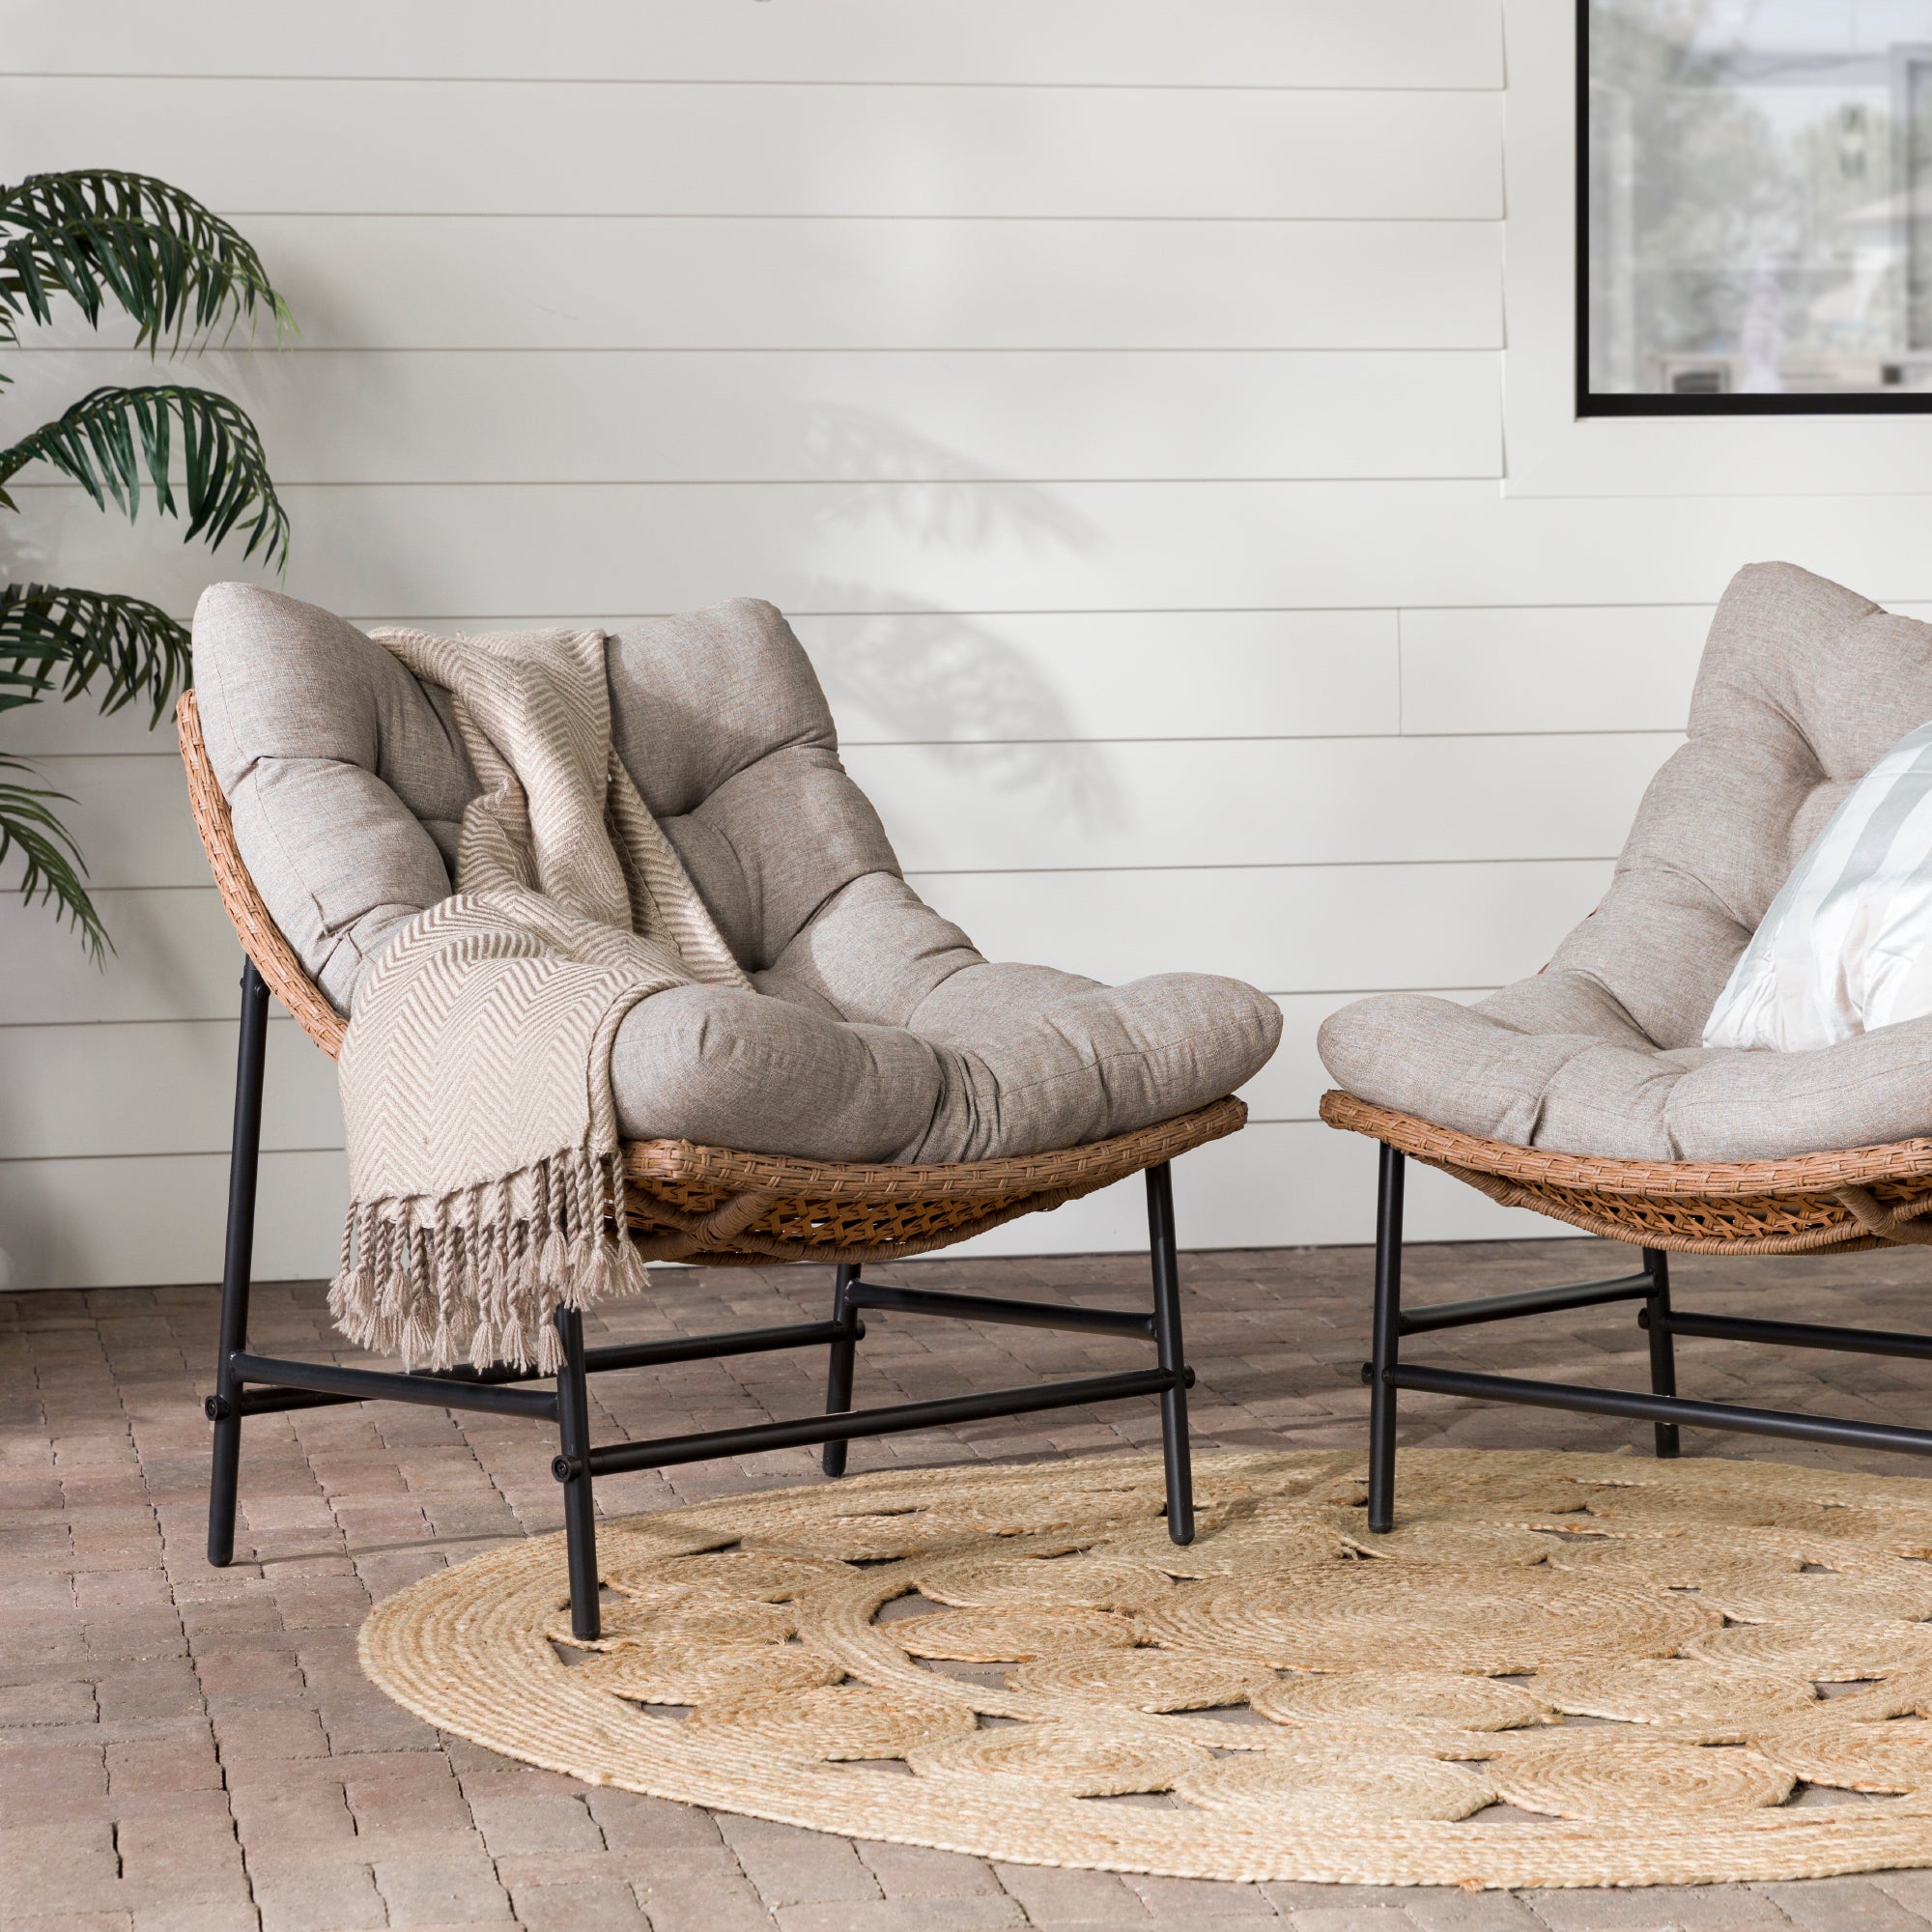 Papasan Scoop Outdoor Patio Chairs Set of 2 - East Shore Modern Home Furnishings